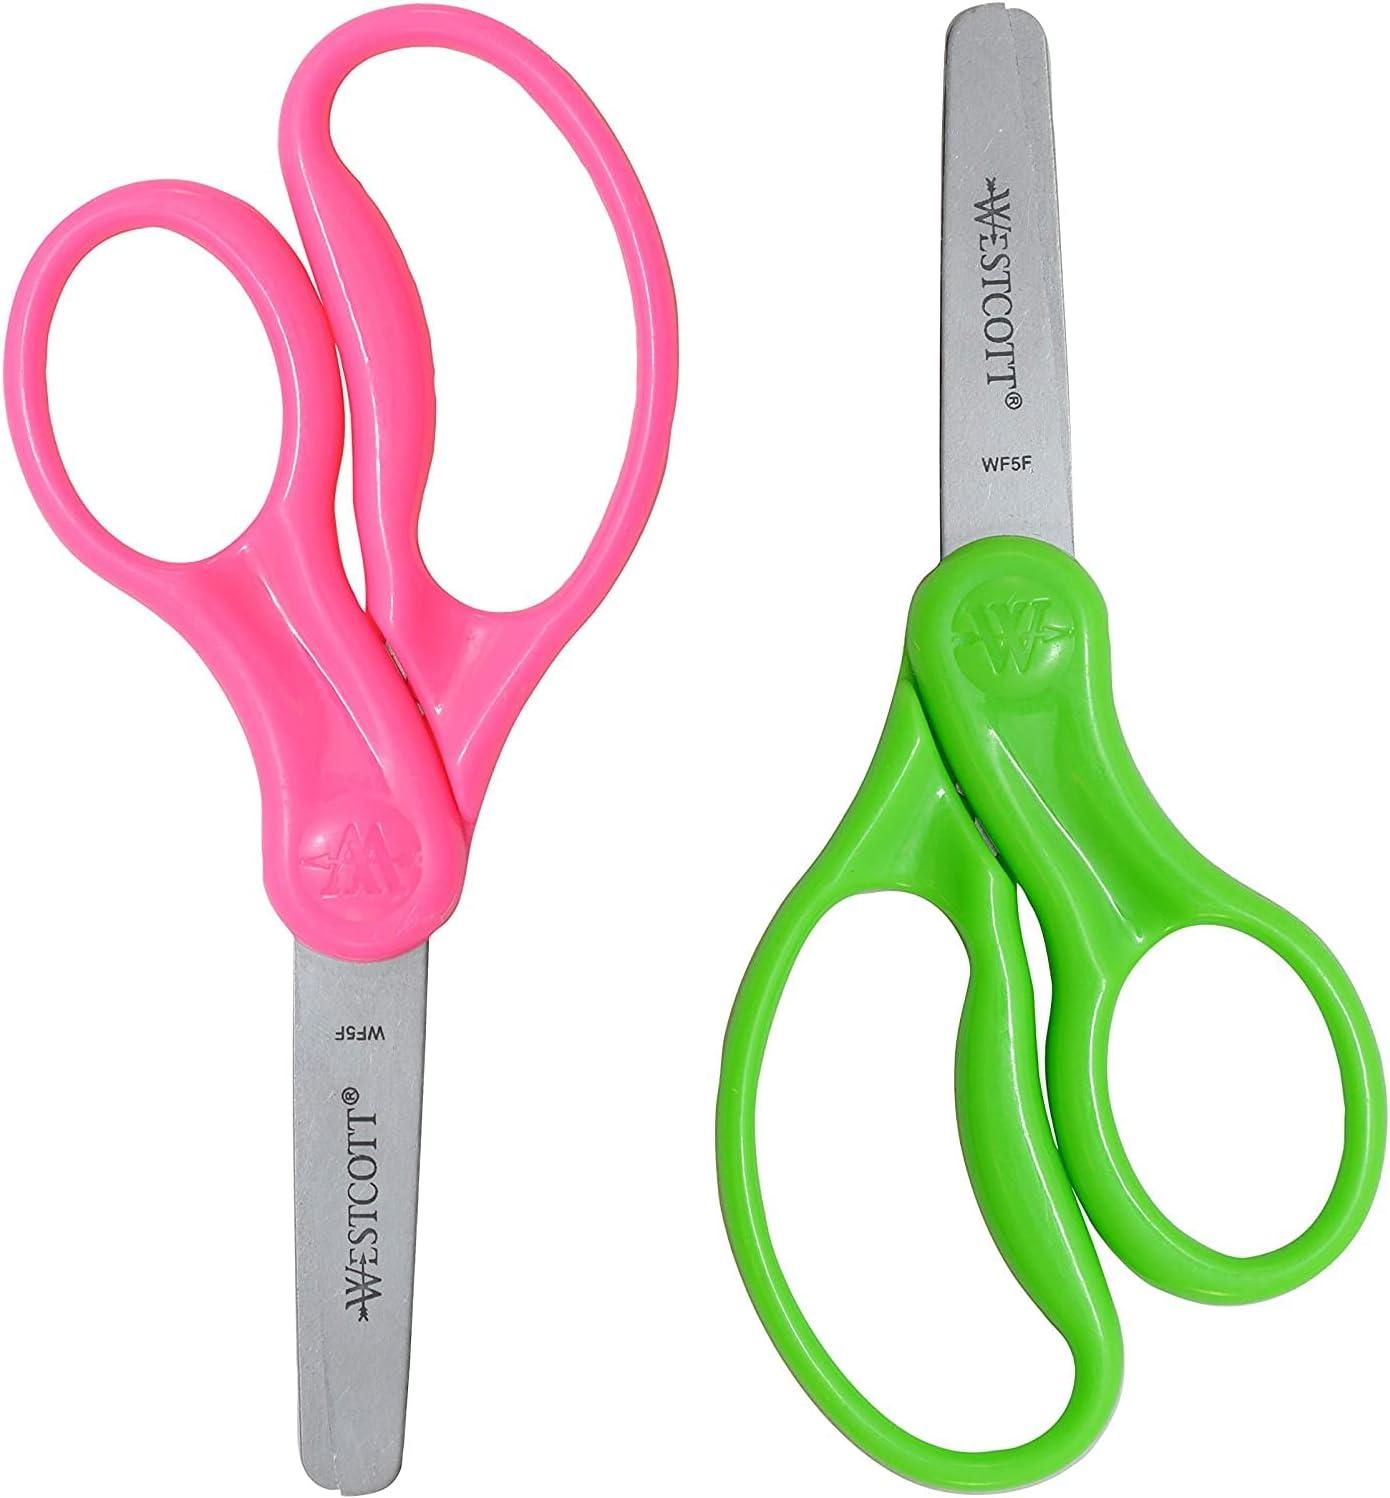 Ambidextrous Fabric Scissors, 8 Blade, Right & Left Handed Users